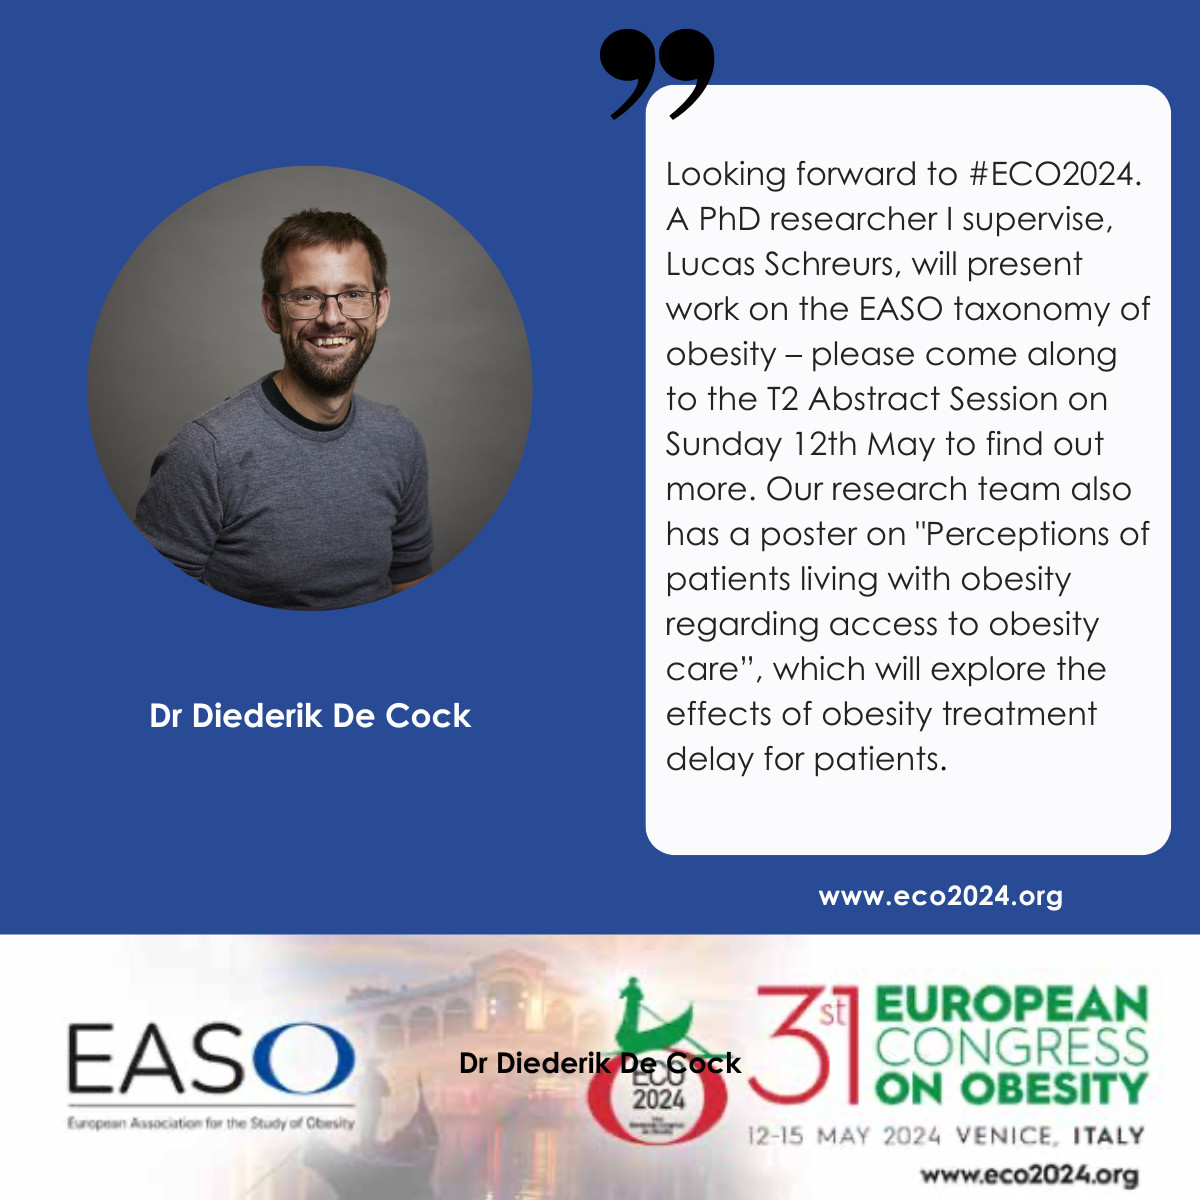 Join Dr Diederik De Cock at the T2 Abstract Session on Sunday, 12th May at #ECO2024. There is still time to register! eco2024.org @DiederikDeCock @EASOPresident @busetto_luca